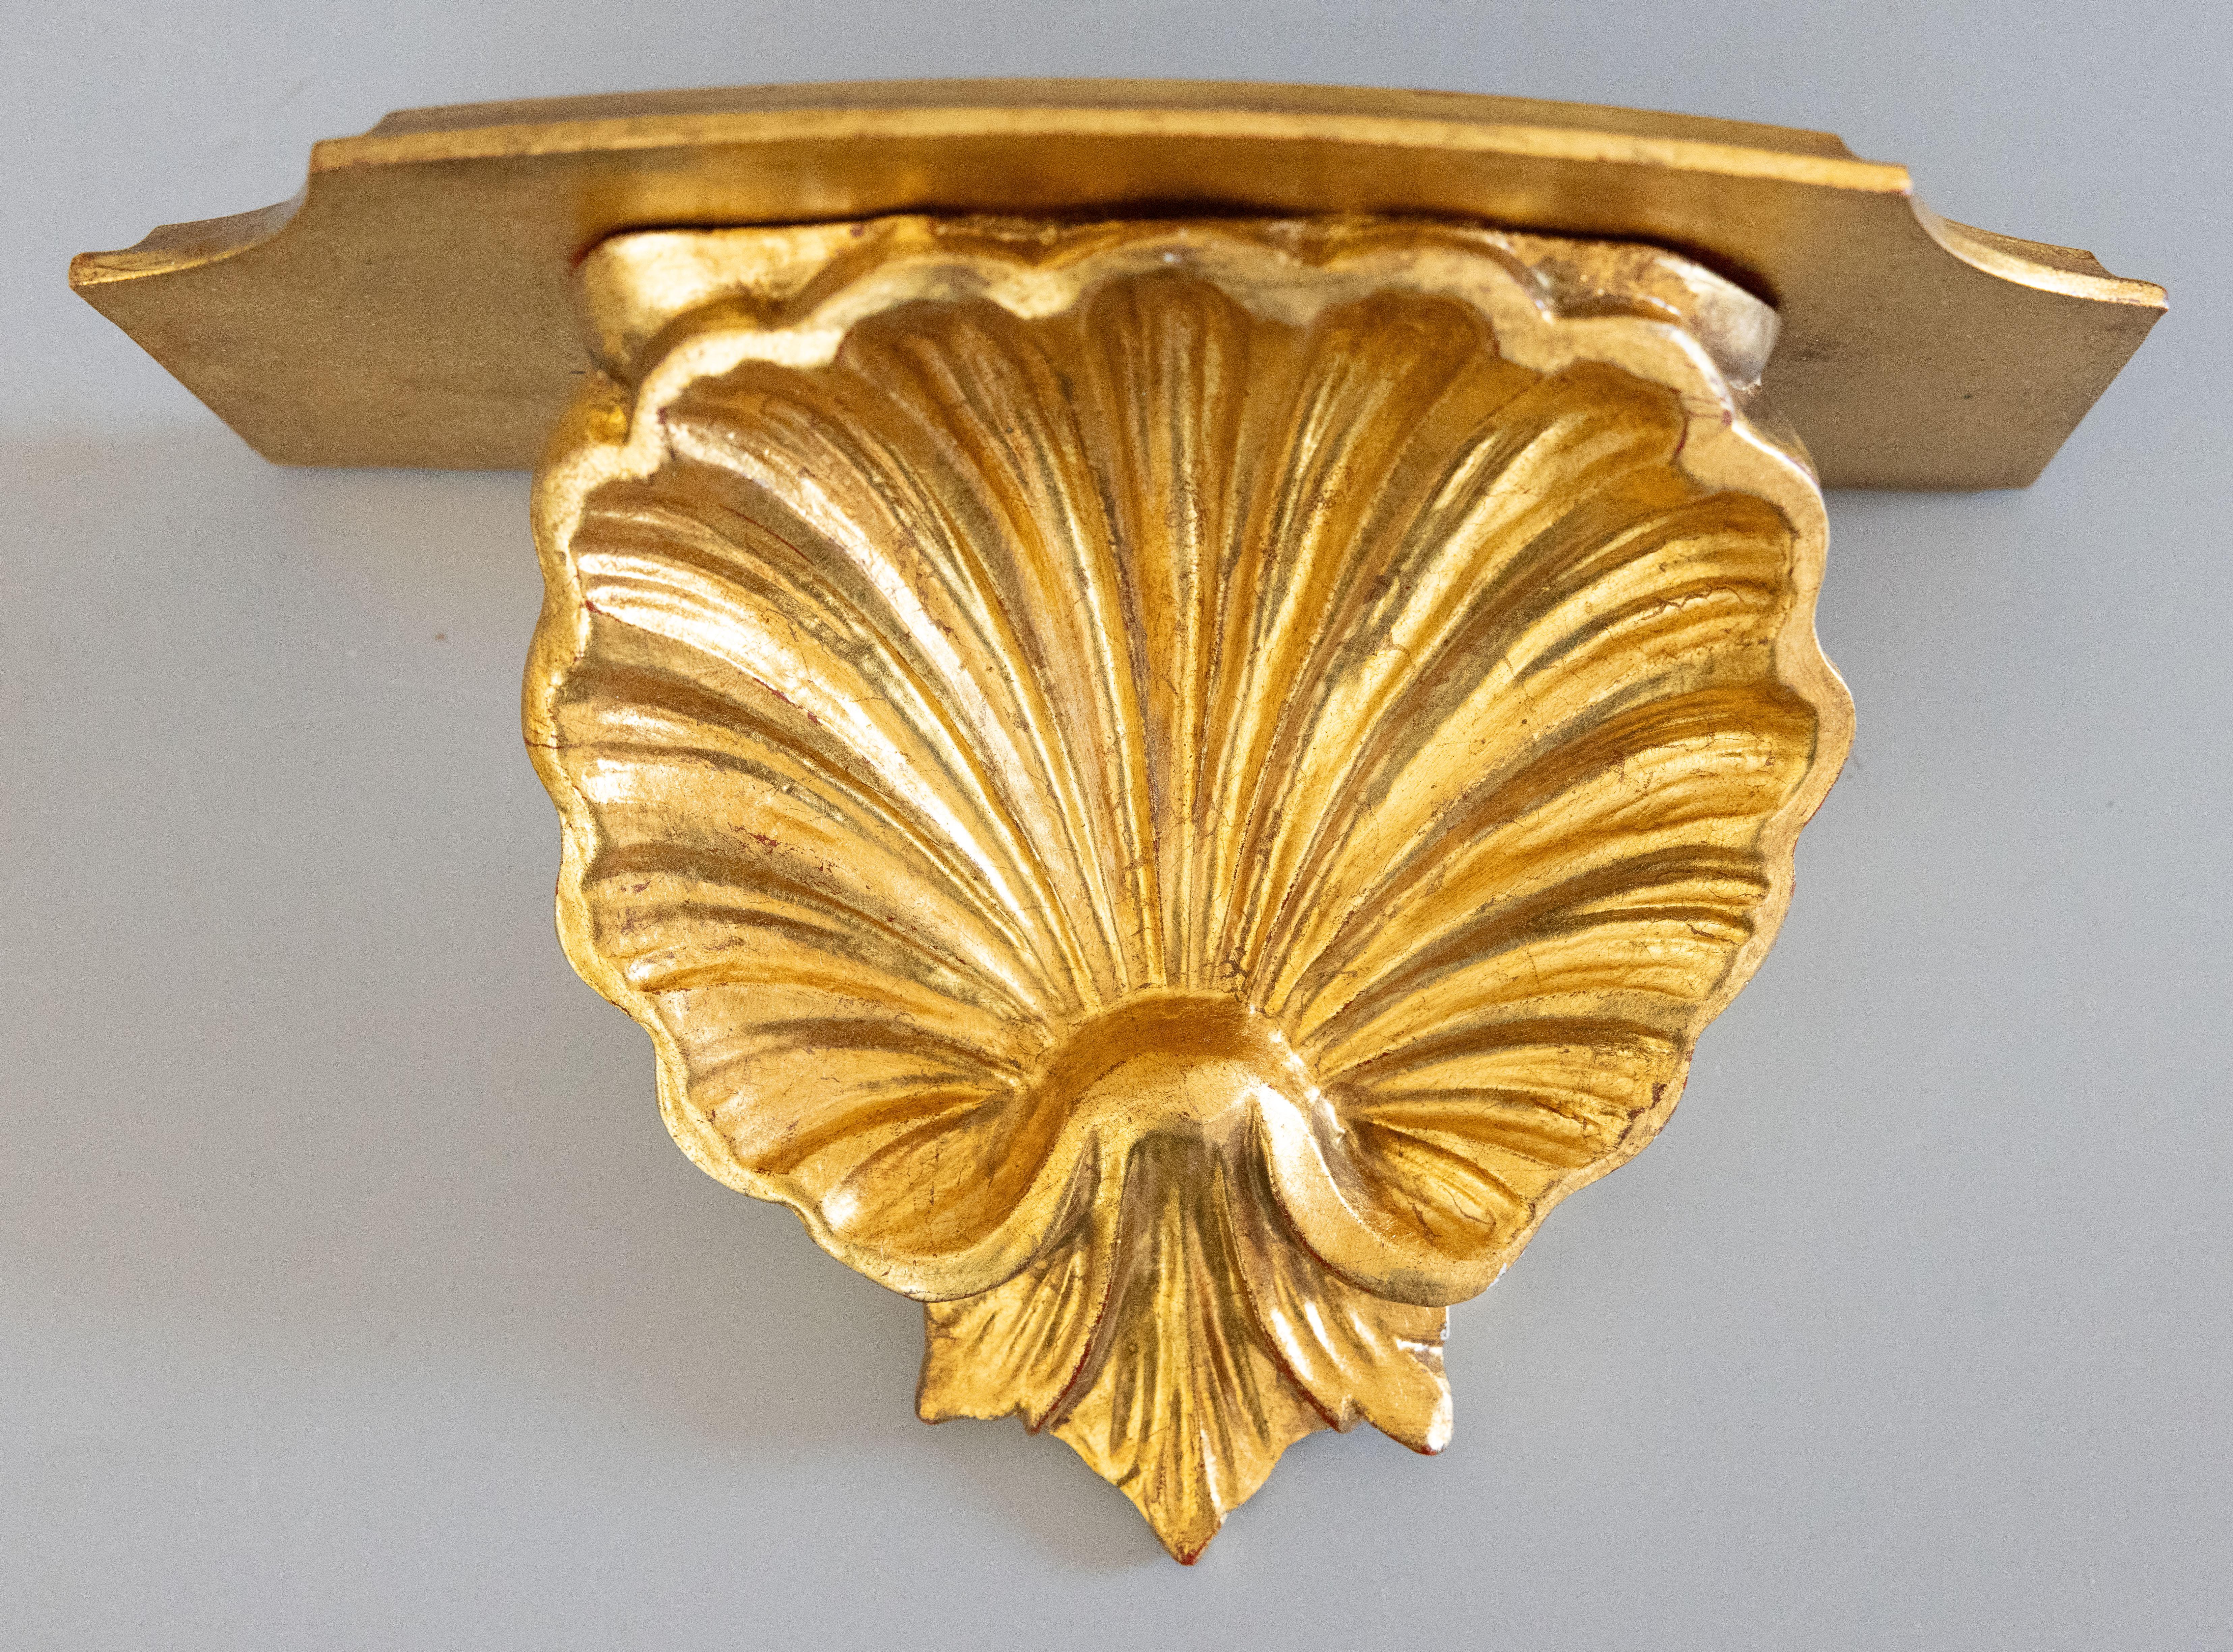 A lovely pair of vintage Mid-Century Italian gilded wood wall brackets shelves with a hand carved seashell design. They are perfect for displaying decorative collectibles or fabulous on their own.

DIMENSIONS
10.75ʺW × 6ʺD × 6.5ʺH